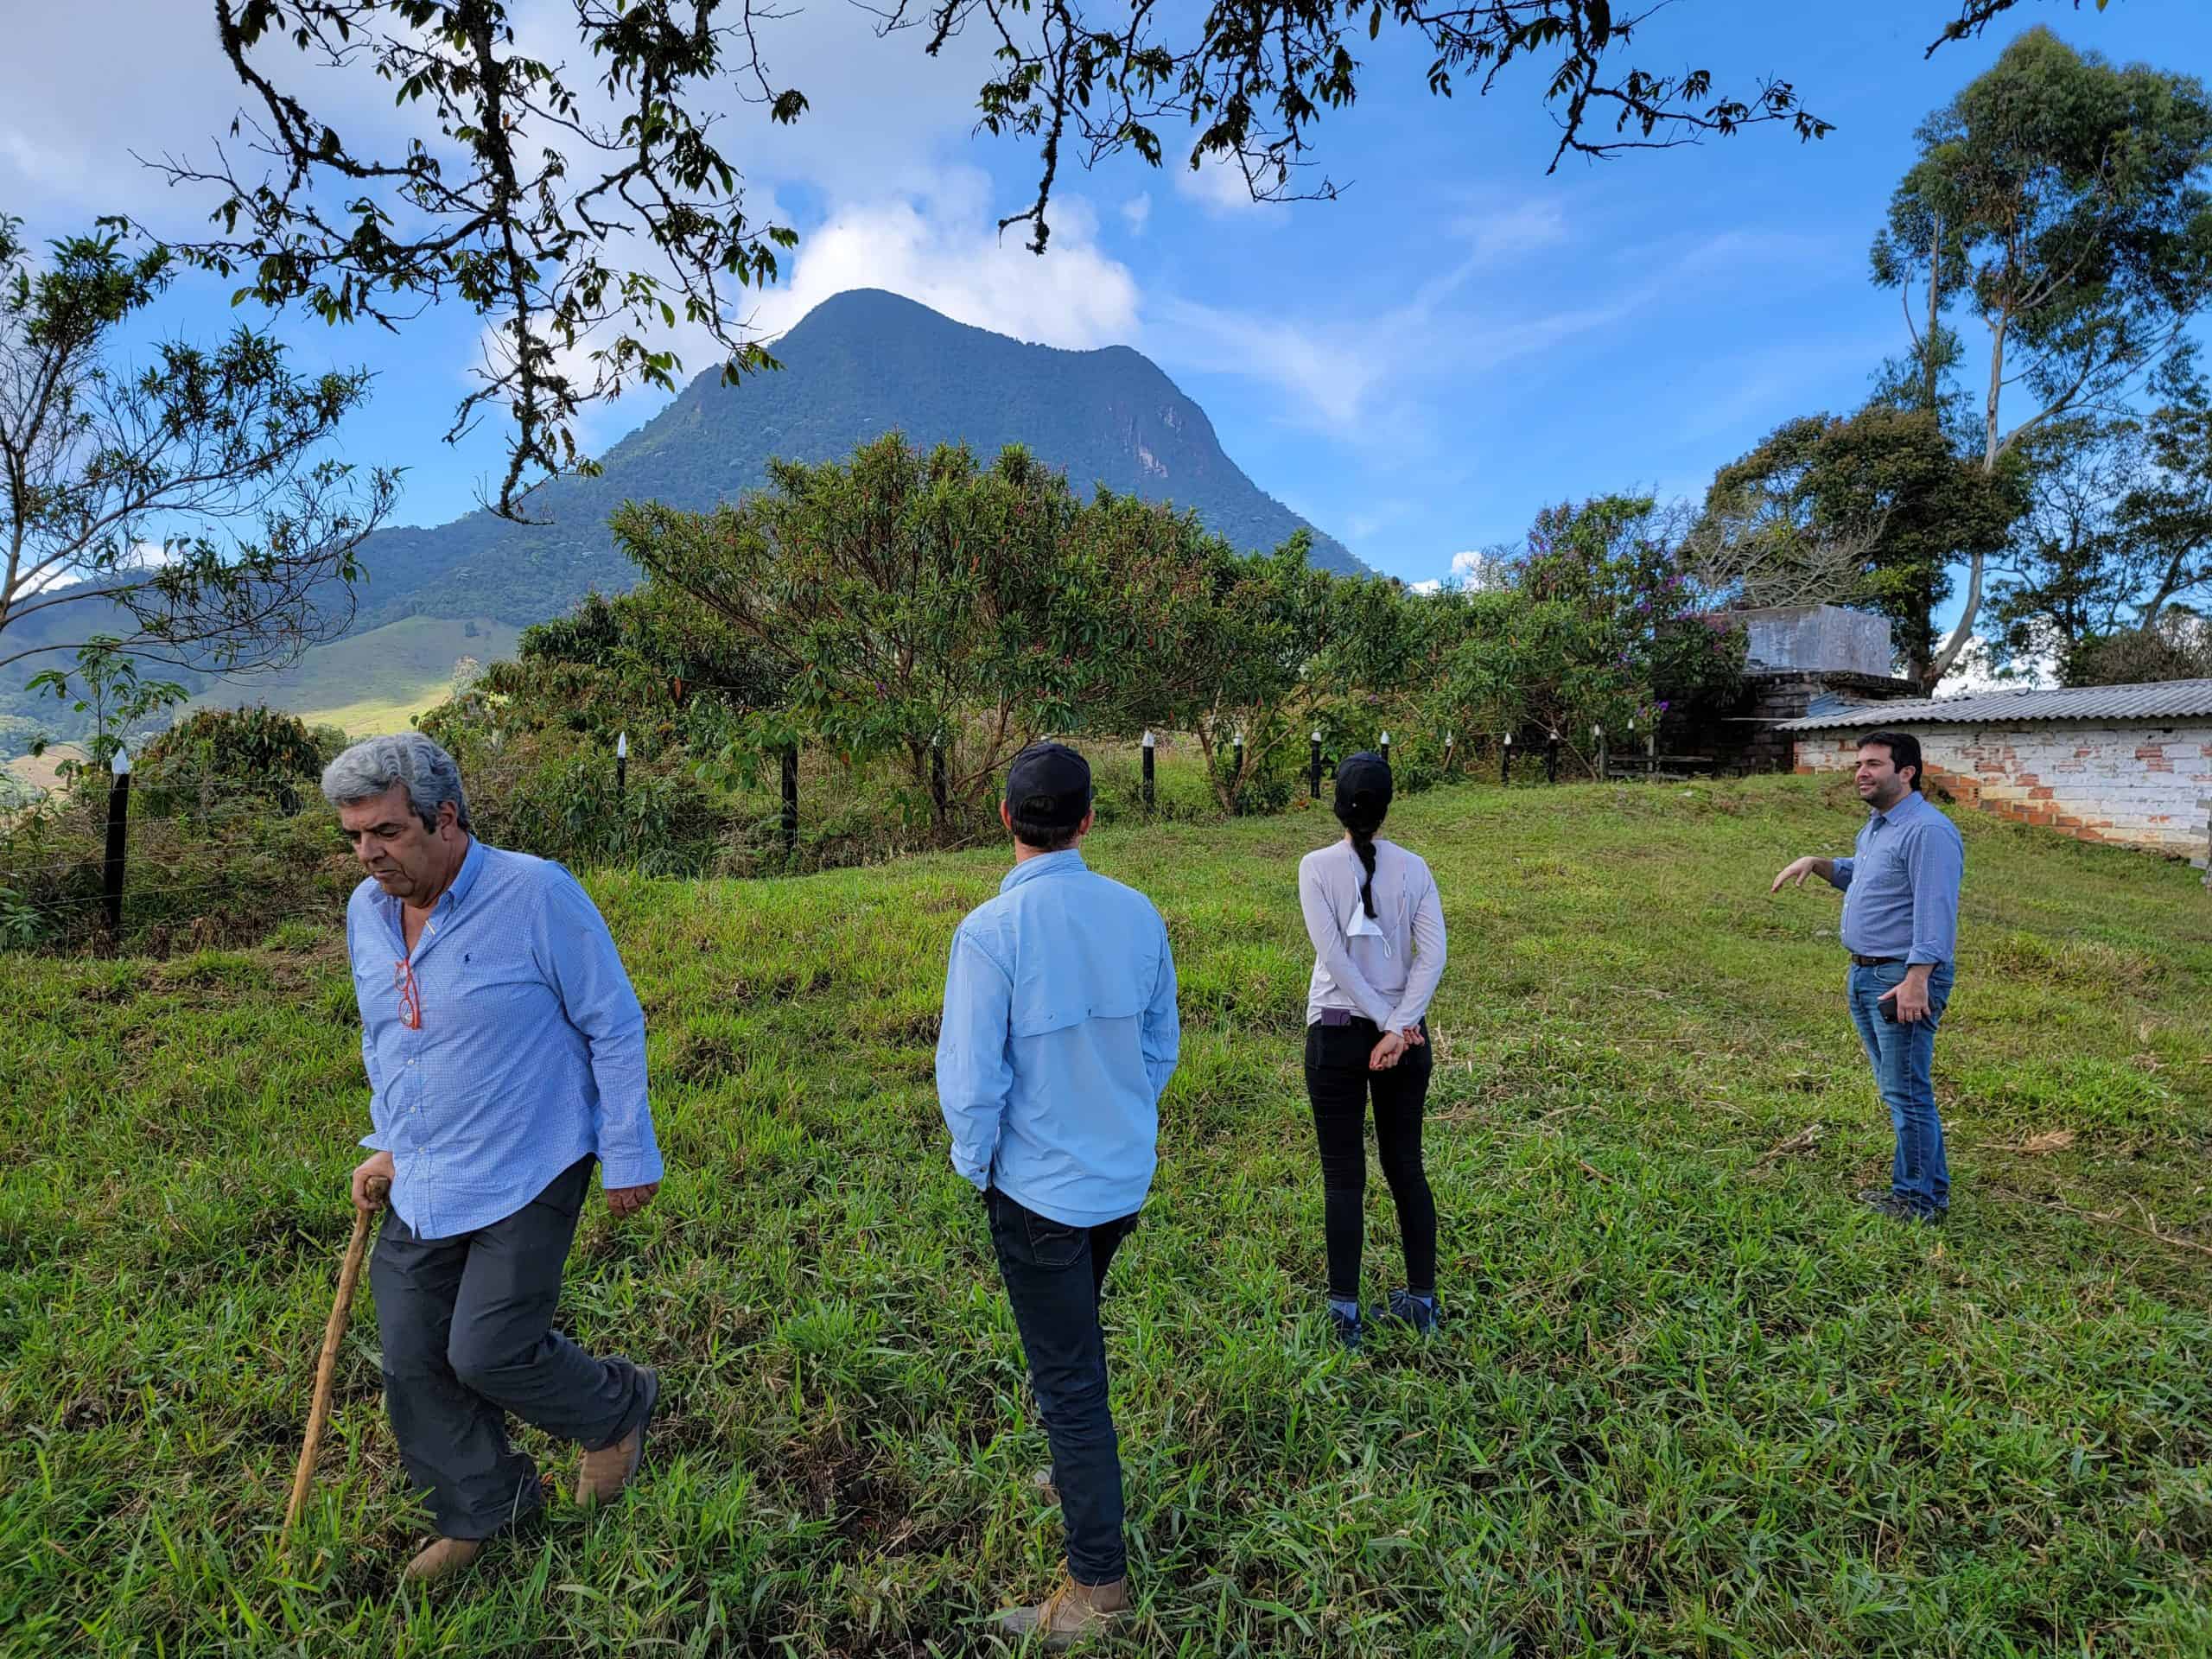 picture showing from left to right, Luis Guillermo Velasquez owner and specialty coffee farmer of "La Melisa" farm, Miguel Echeverri Hatillo Coffee's co-founder and chief quality officer, Marcia Miles CEO of Kiskadee Design, and Felipe Mejia; Luis Guillermo's son-in-law, looking at the majestic "Cerro Bravo" near Fredonia, Antioquia - Colombia from "La Melisa" farm